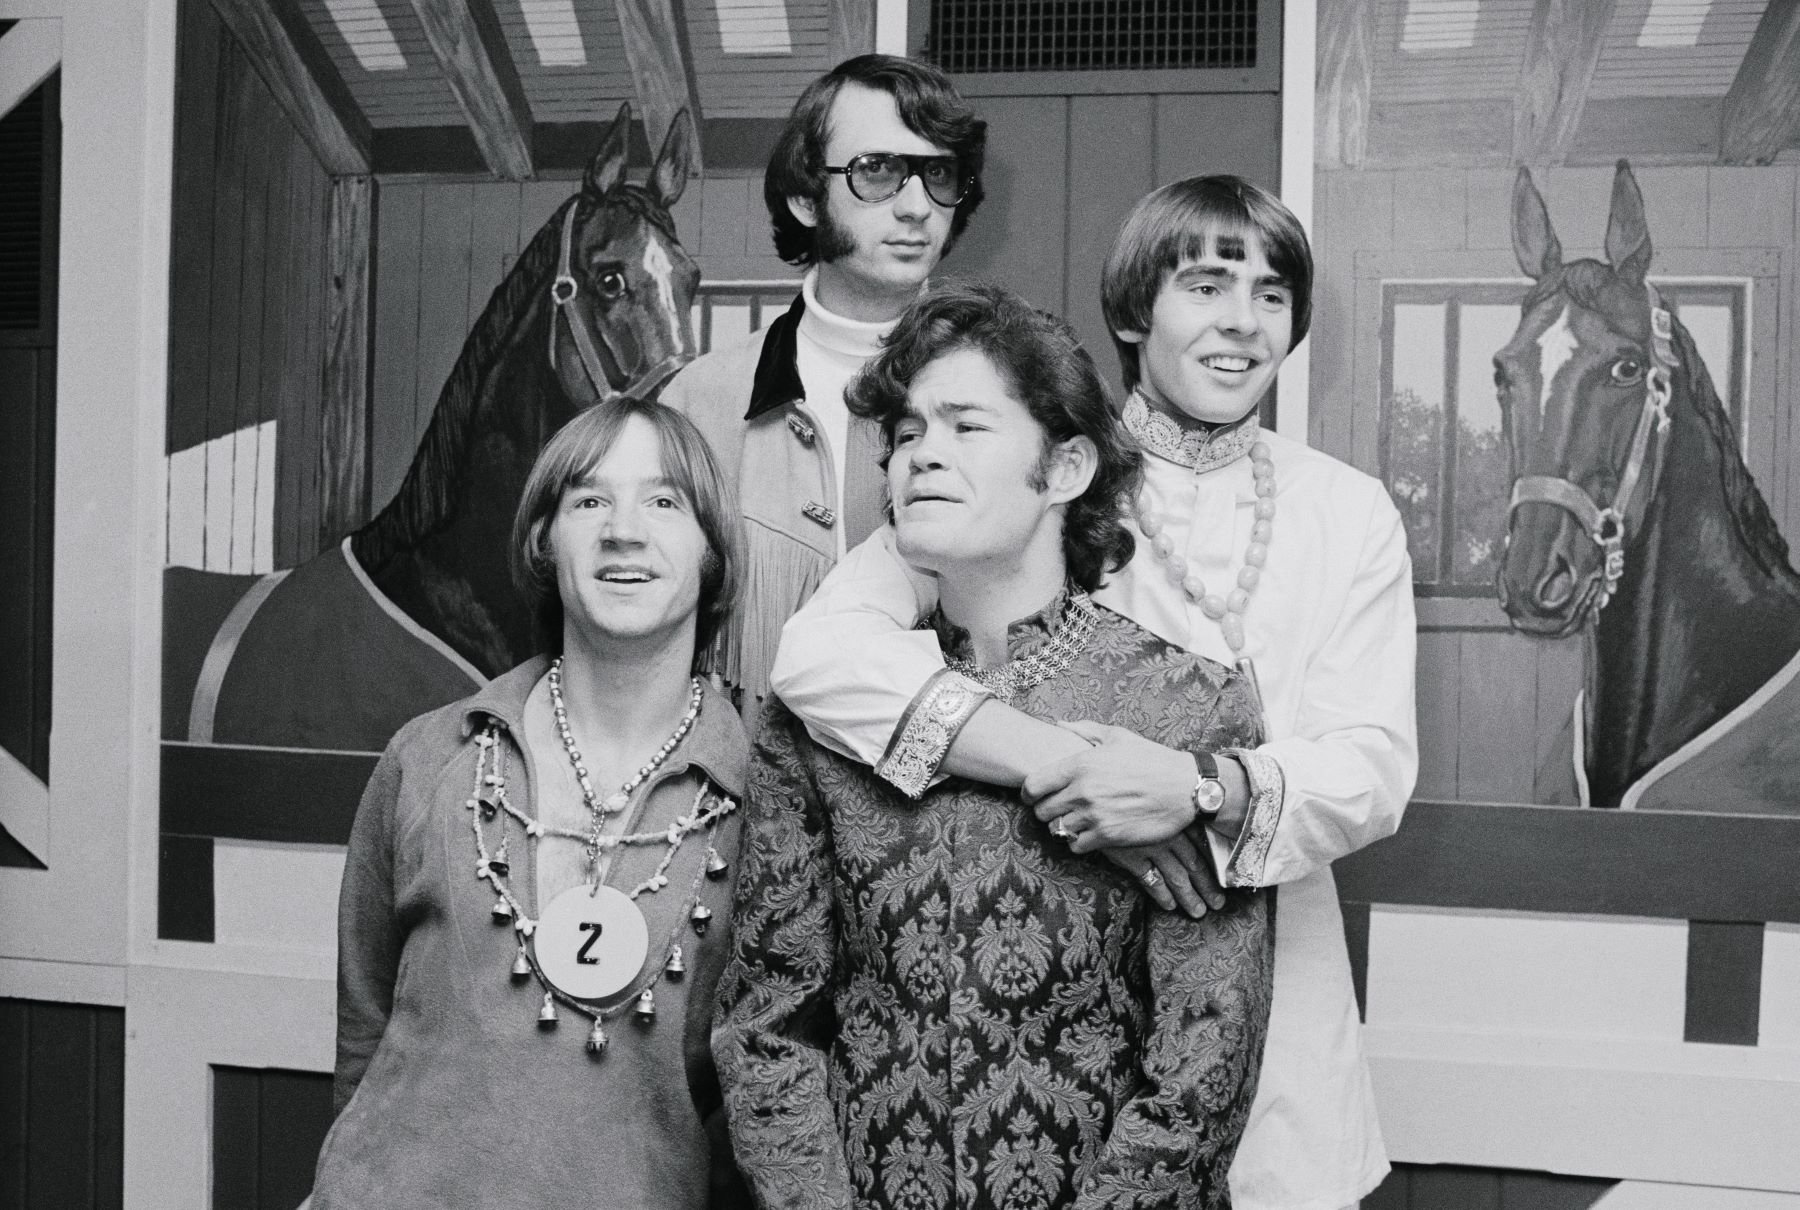 The Monkees Hit Town, posing for a photographer at their hotel after arriving in New York